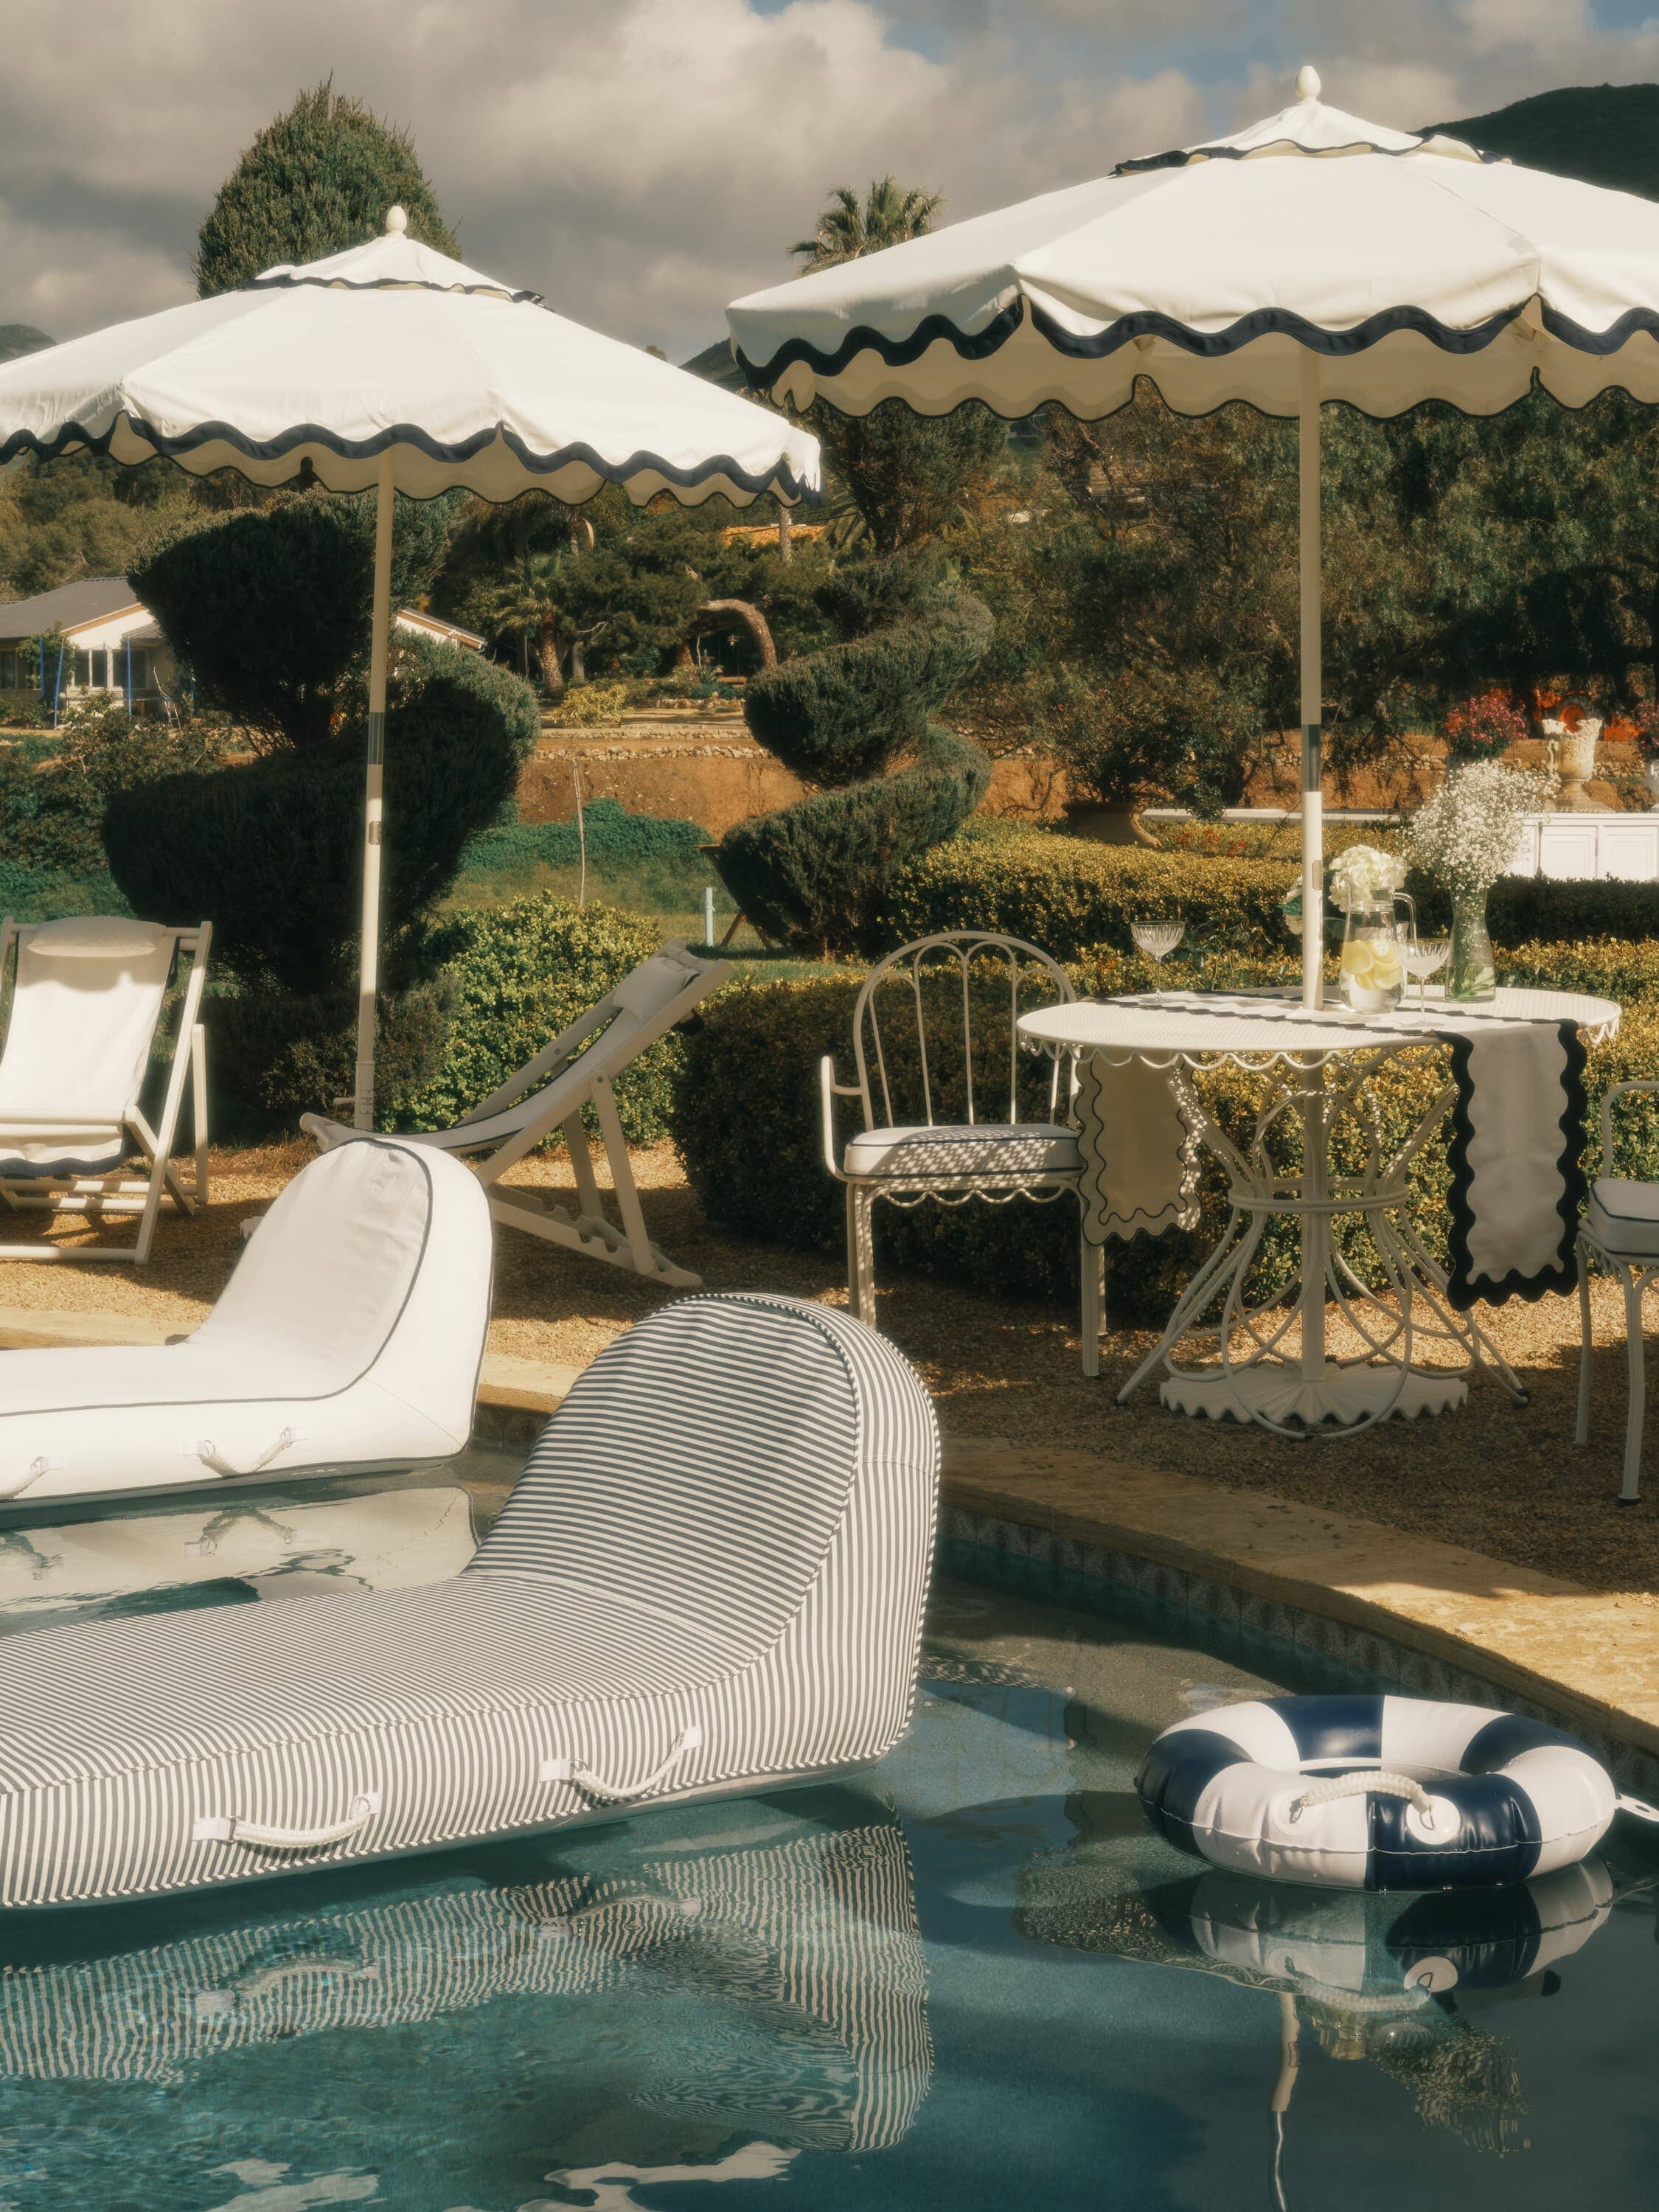 Pool with pool loungers, floats, umbrellas and chairs